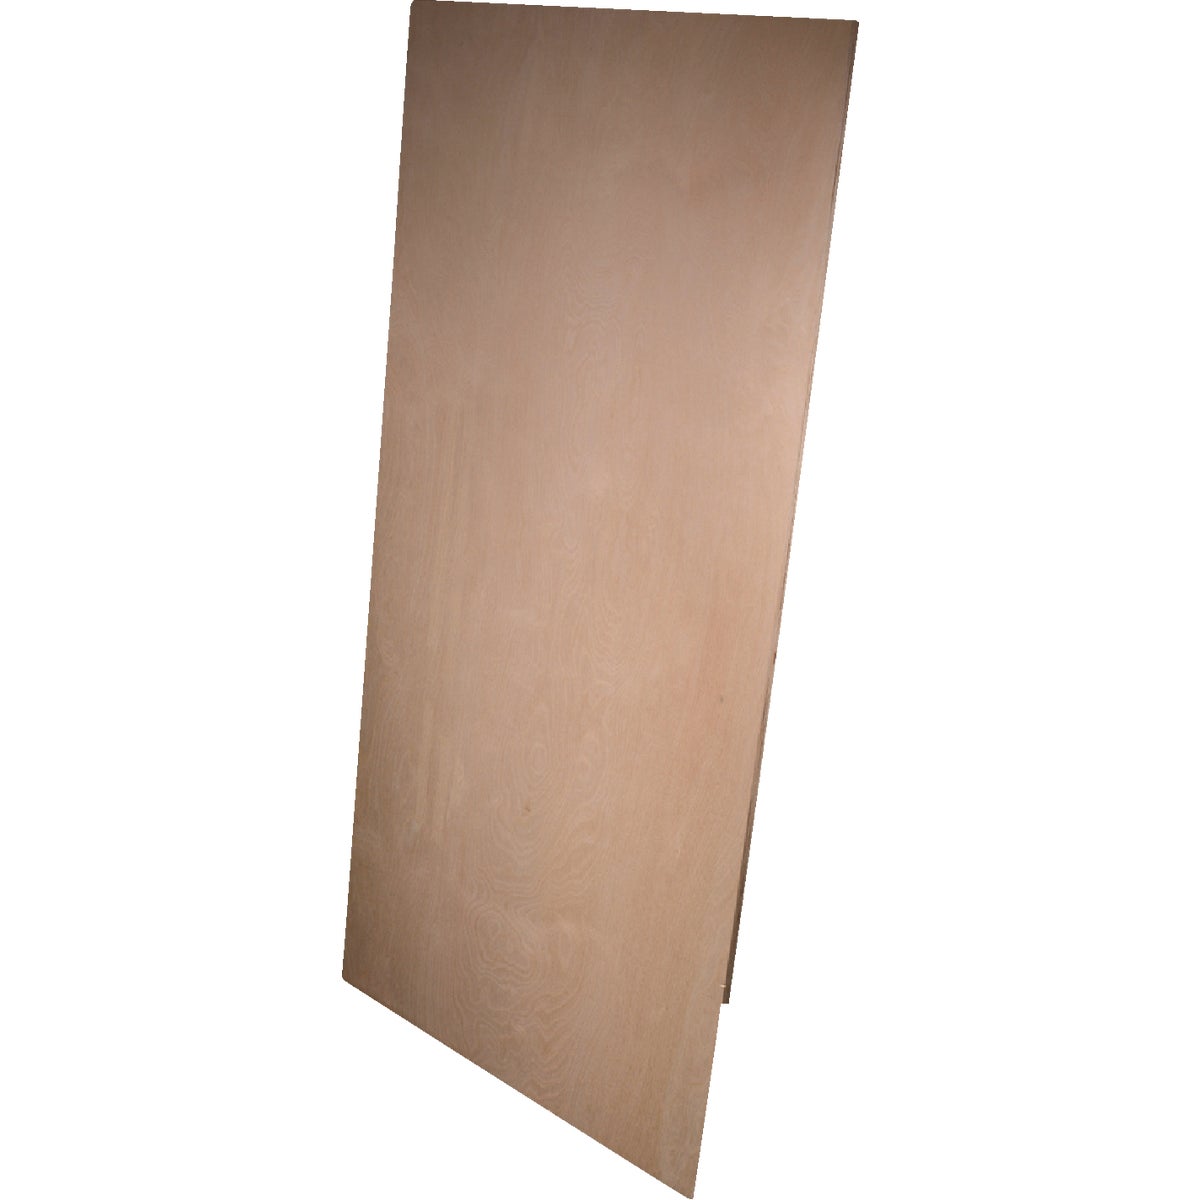 Alexandria Moulding 1/2 In. x 24 In. x 48 In. Pine Plywood